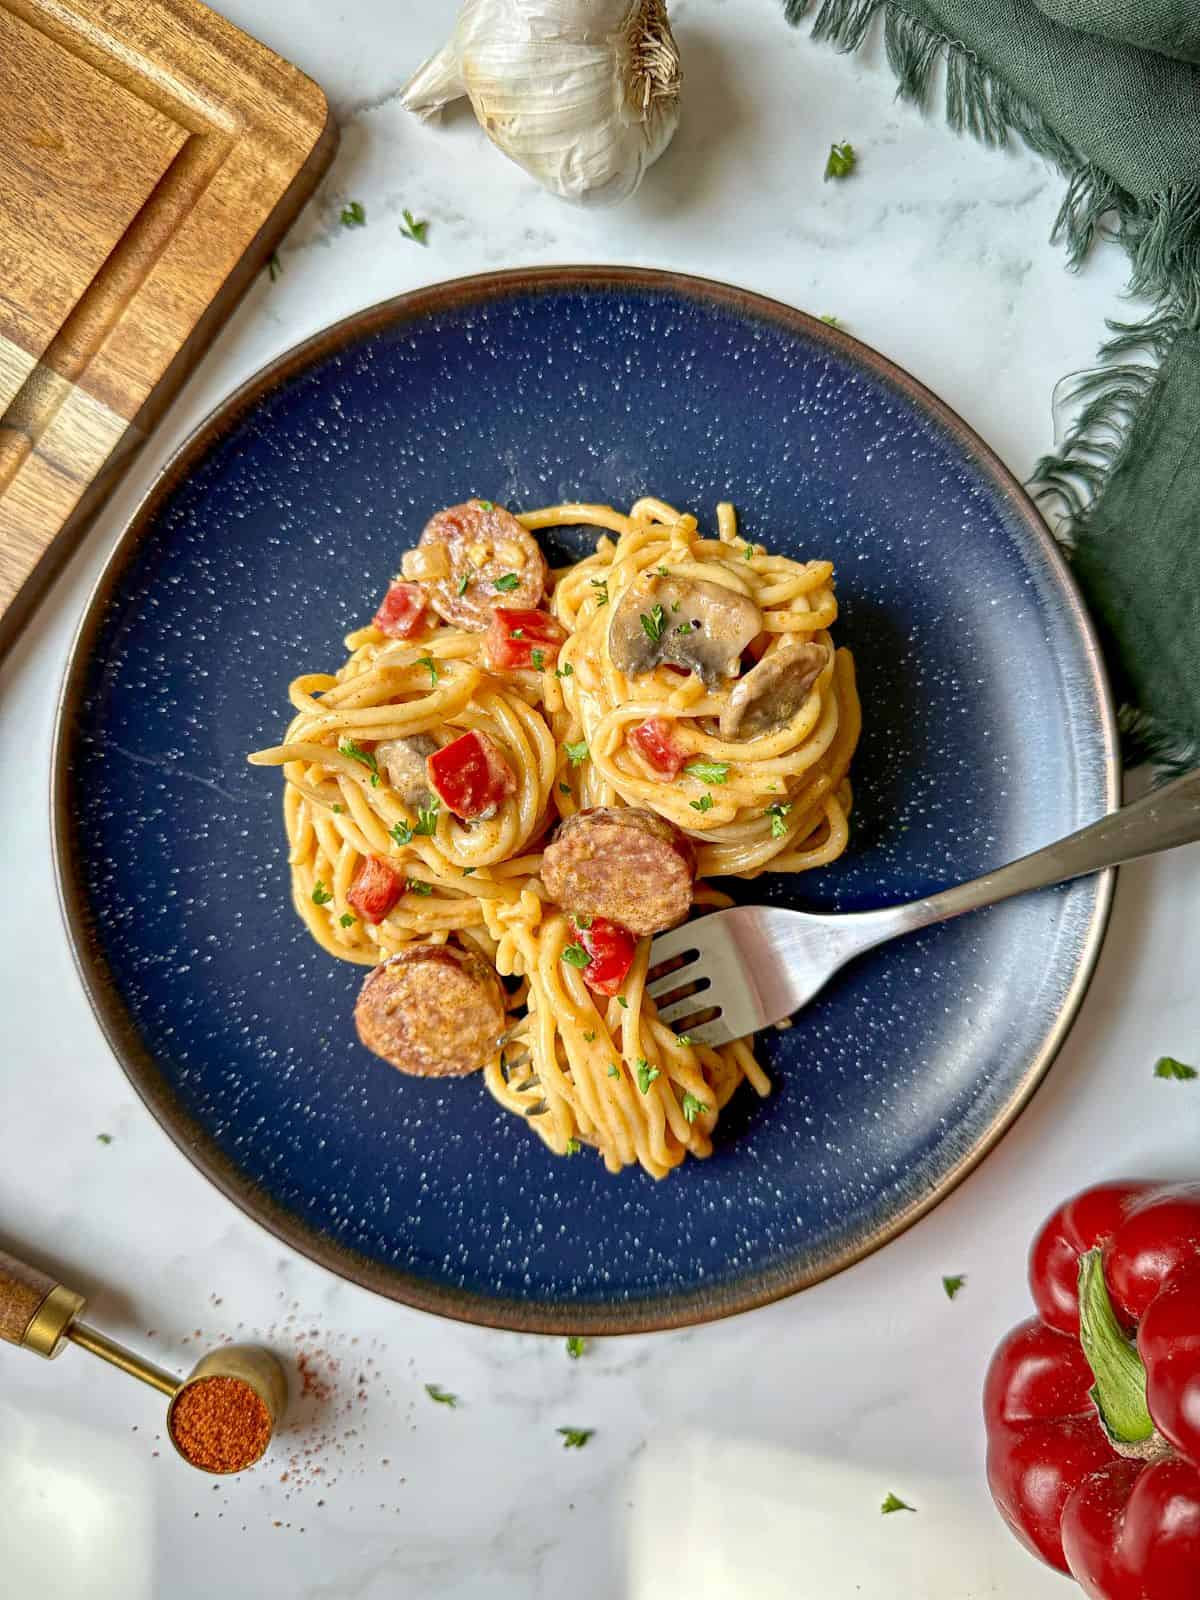 Spaghetti with sausage and red peppers on a round plate. The creamy spaghetti is wrapped around a fork on the plate.